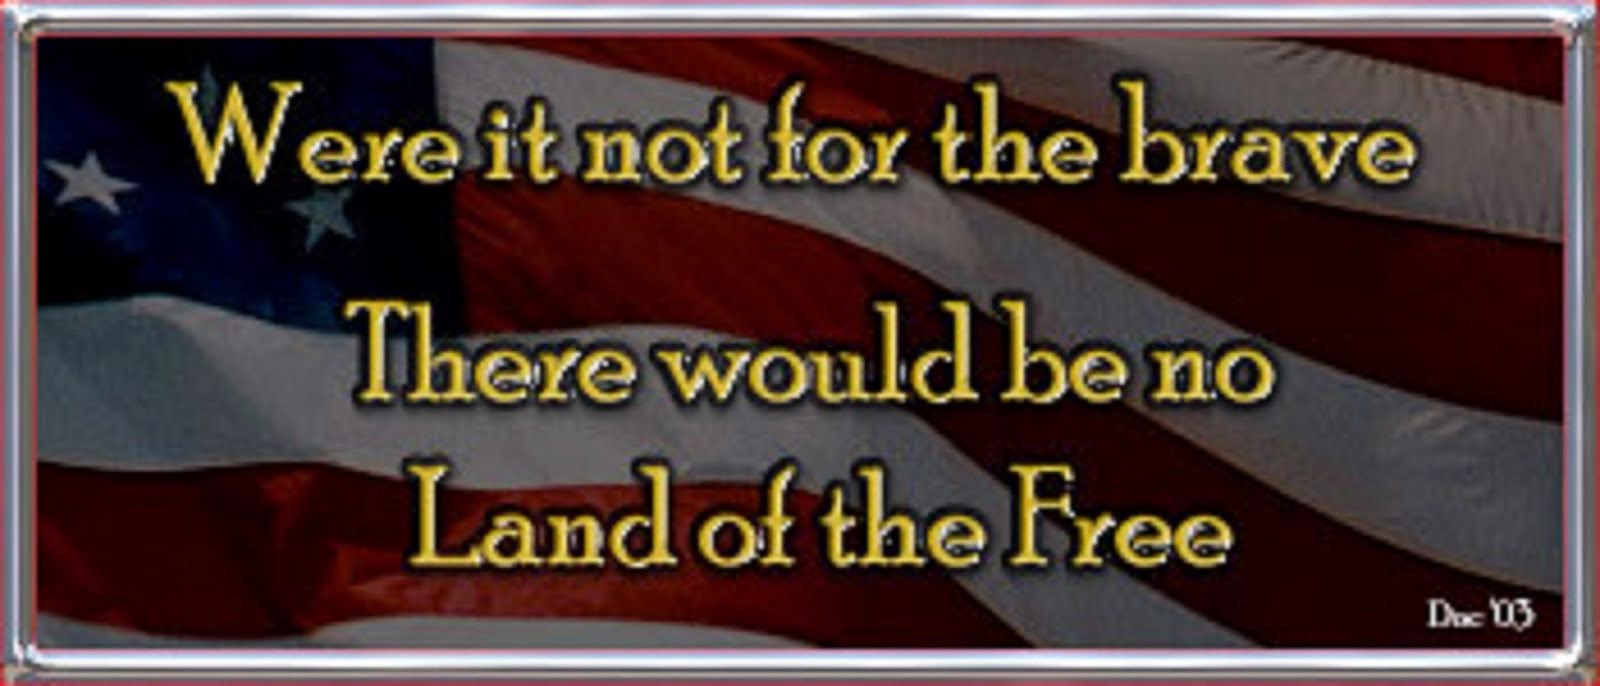 WERE IT NOT FOR THE BRAVE THEREWOULD BE NO LAND OF THE FREE